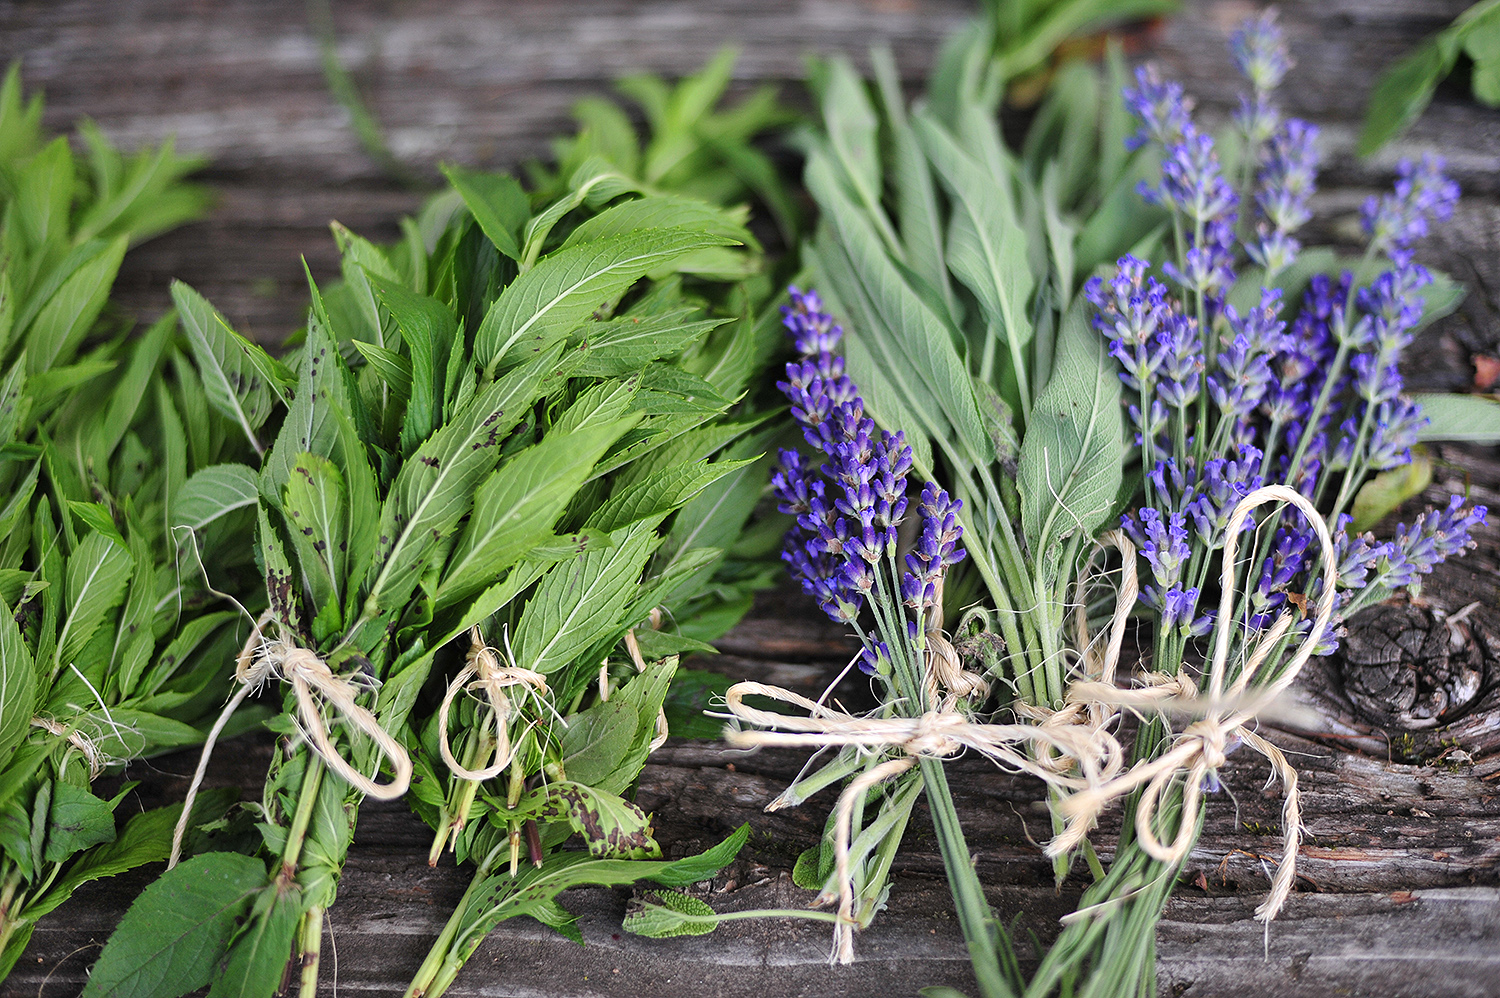 Mint, sage and lavender also are grown at the farm and sold at the market.